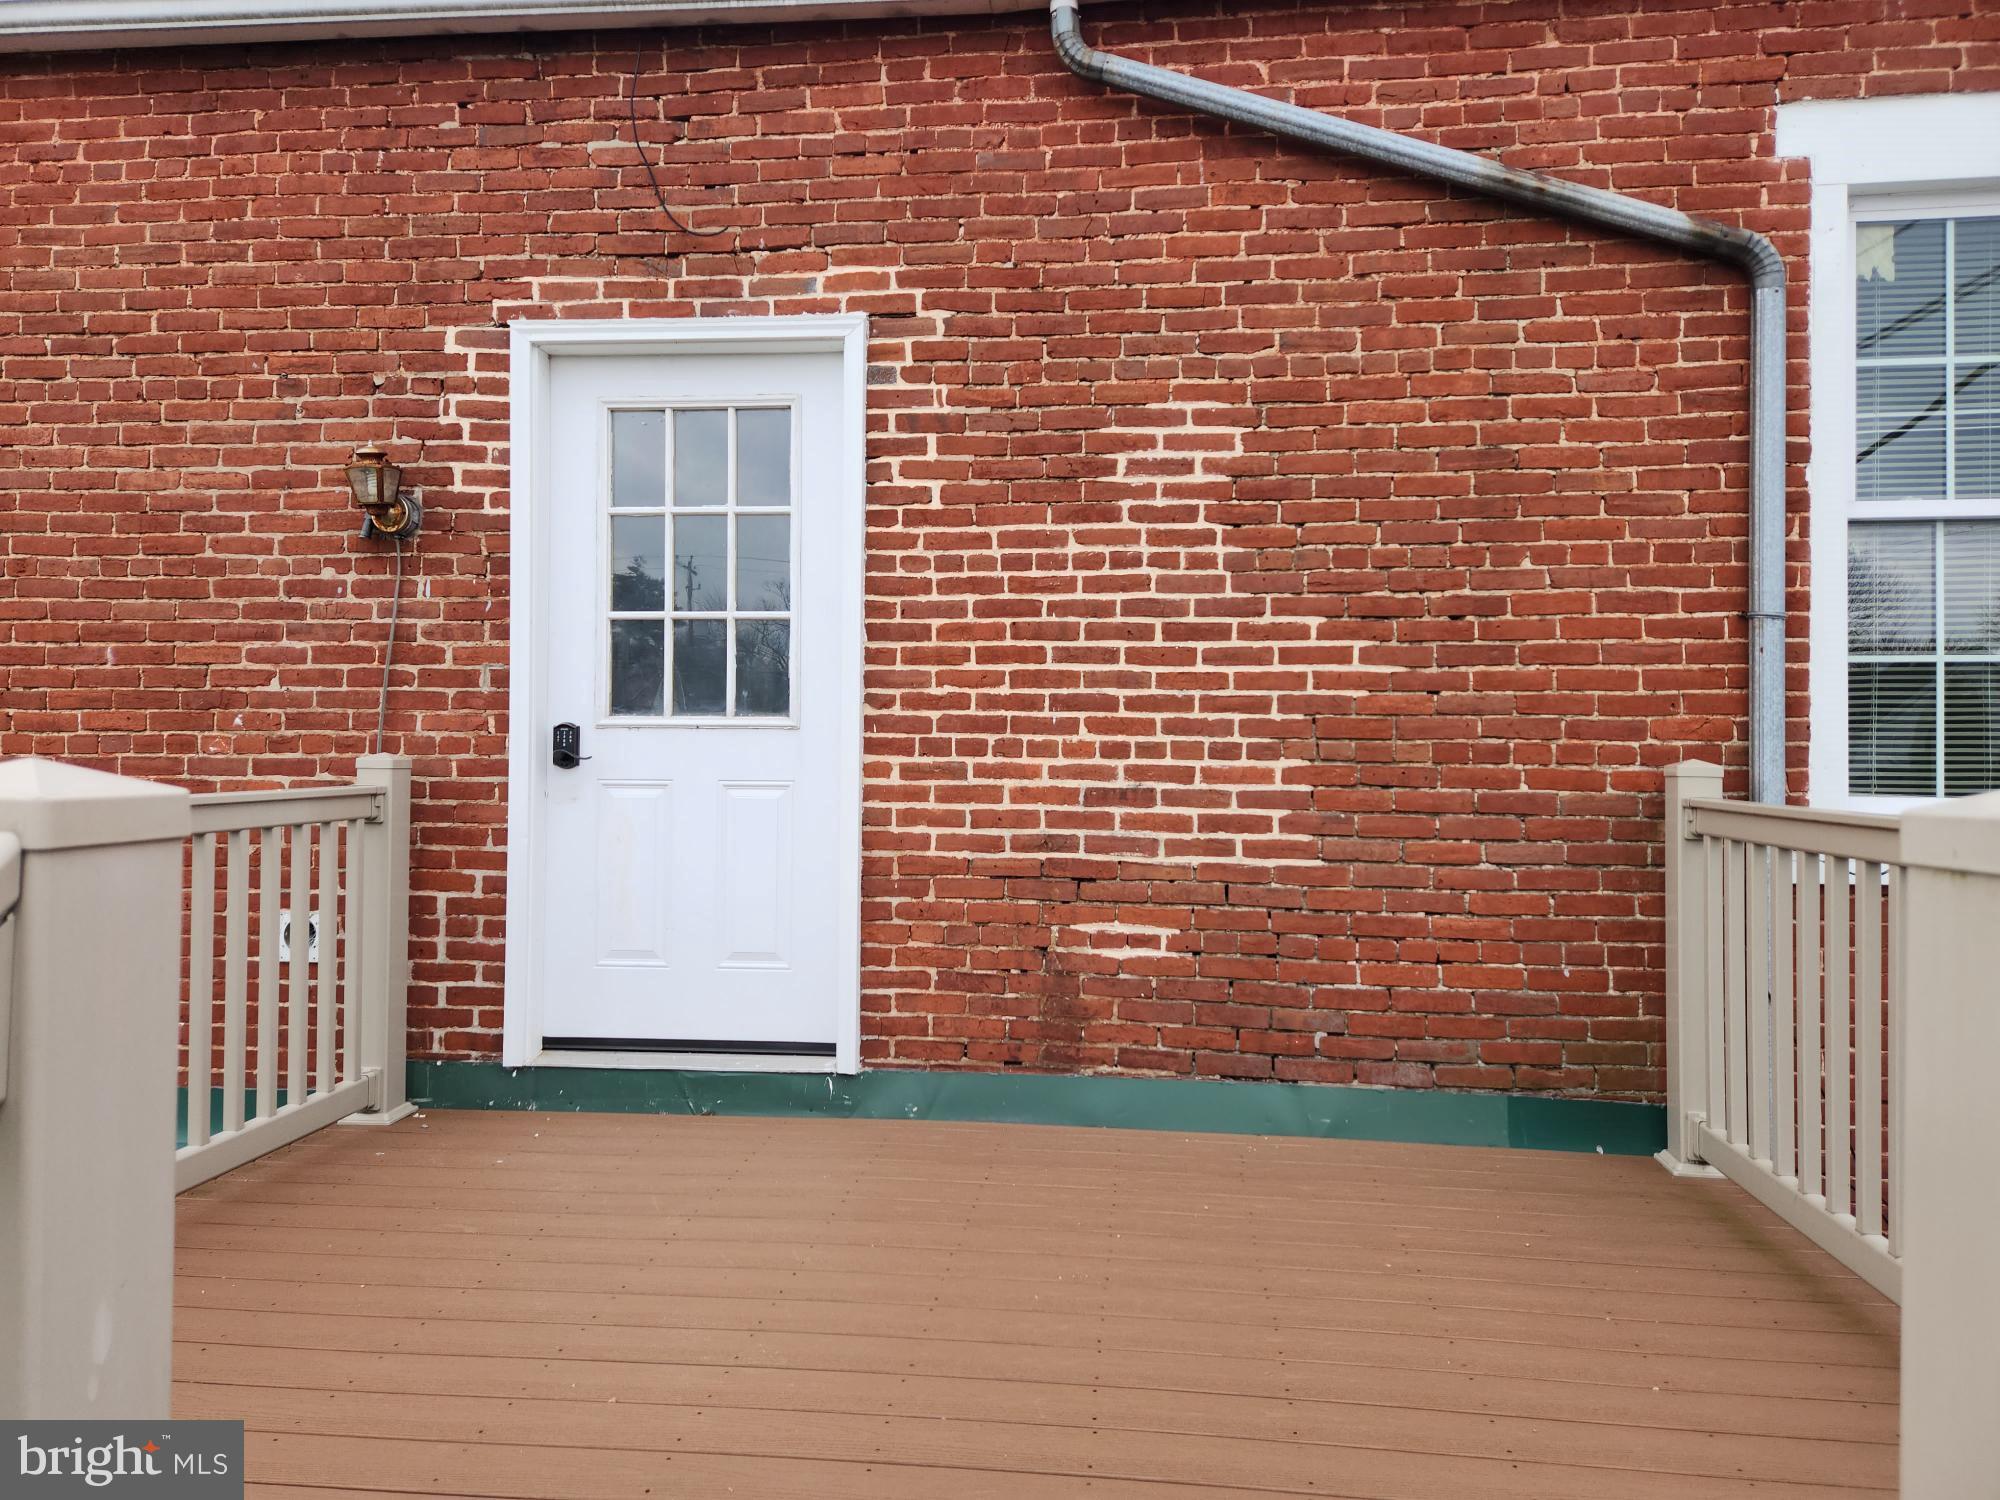 a view of front door of house with stairs